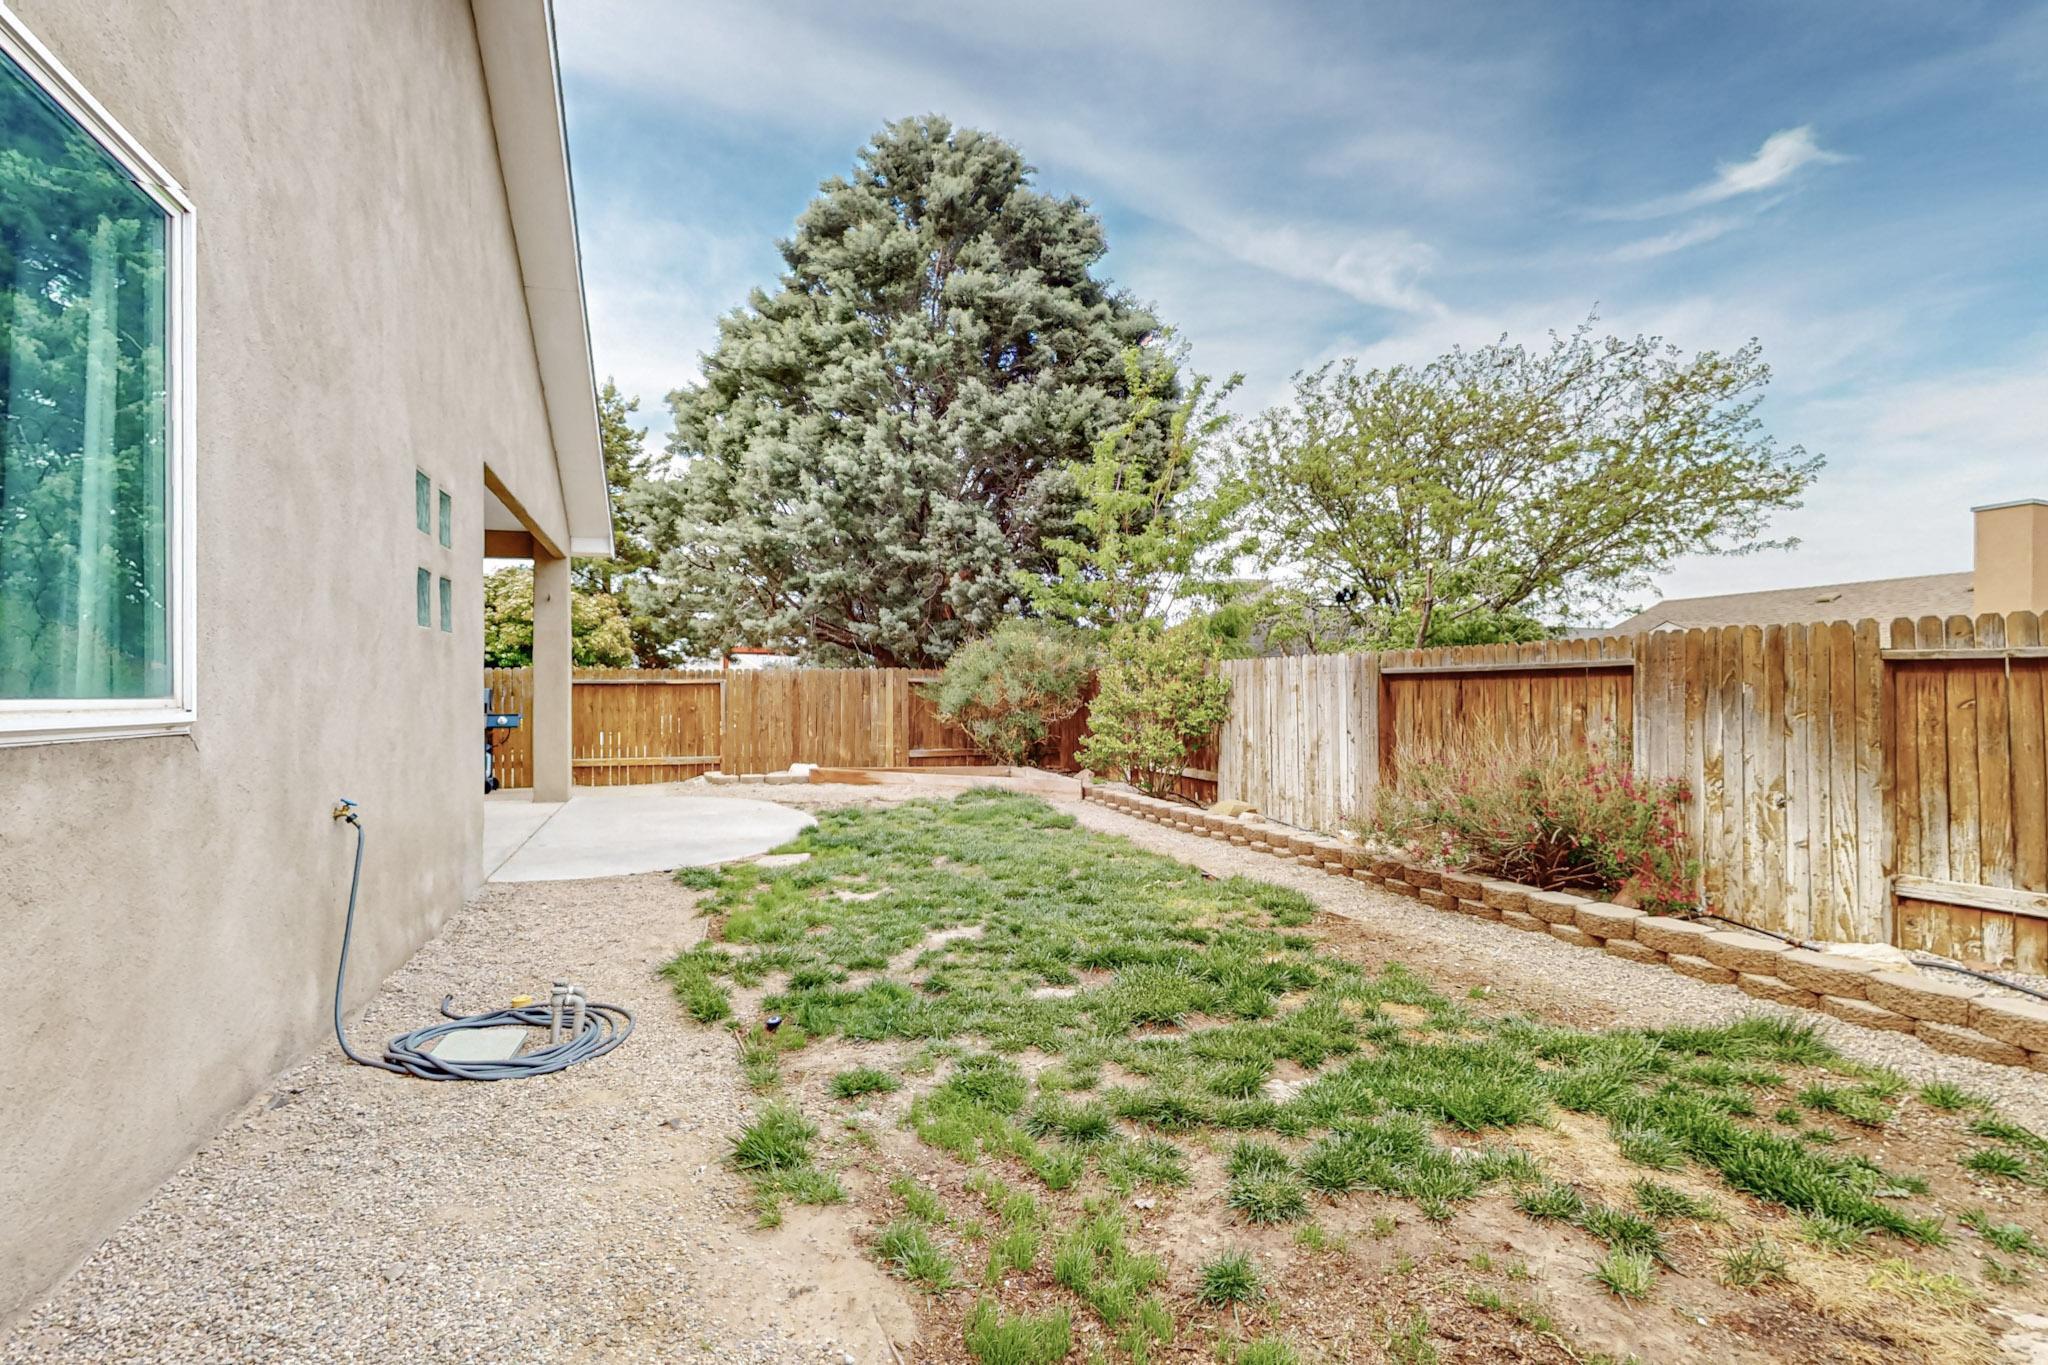 1416 Stoneway Drive NW, Albuquerque, New Mexico 87120, 3 Bedrooms Bedrooms, ,2 BathroomsBathrooms,Residential,For Sale,1416 Stoneway Drive NW,1061392